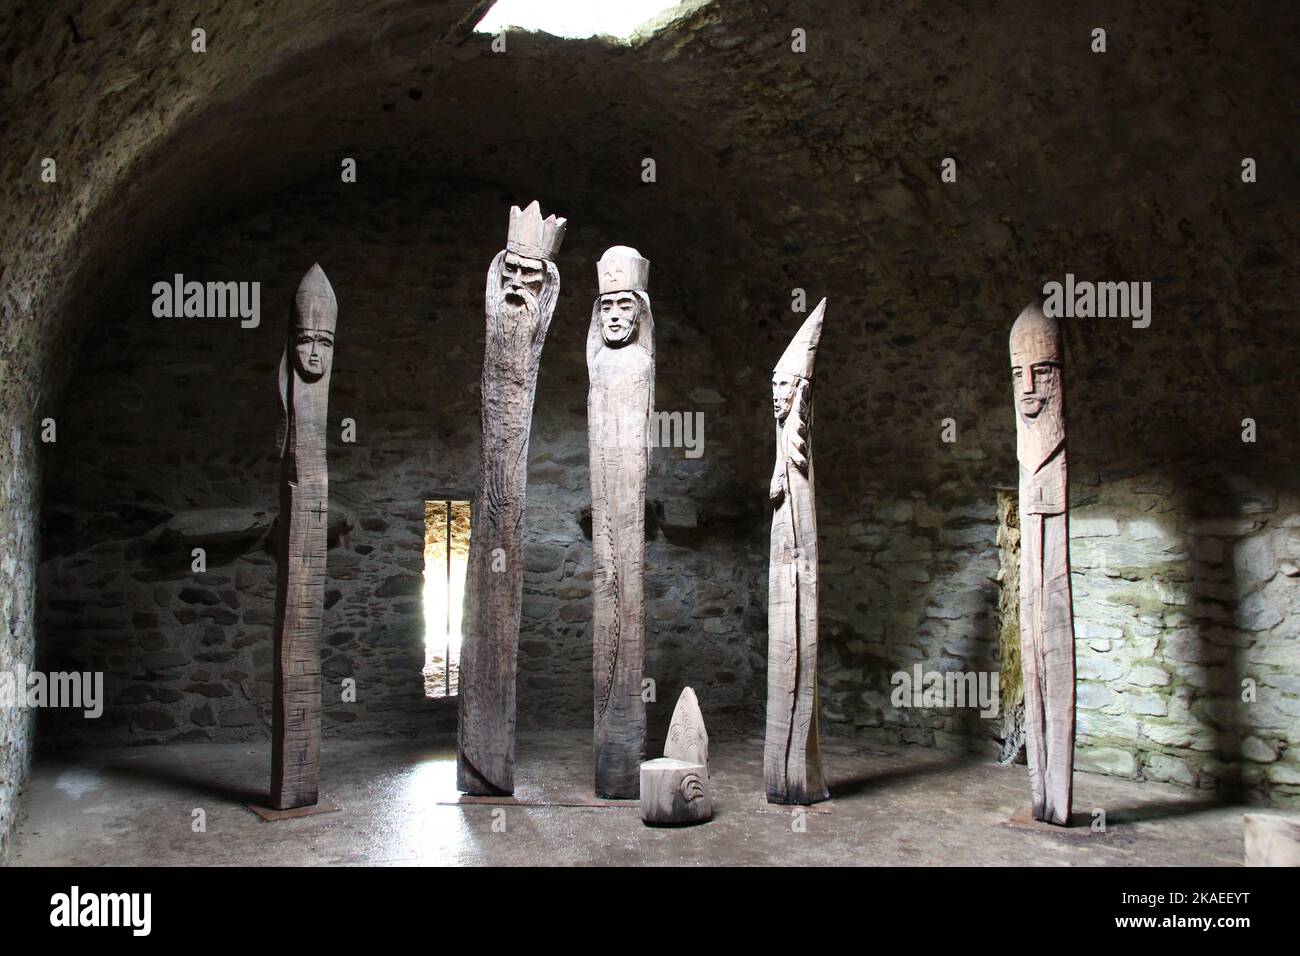 The carved historical figures in a vault of Kronberg Castle in Kronberg, Germany. Stock Photo